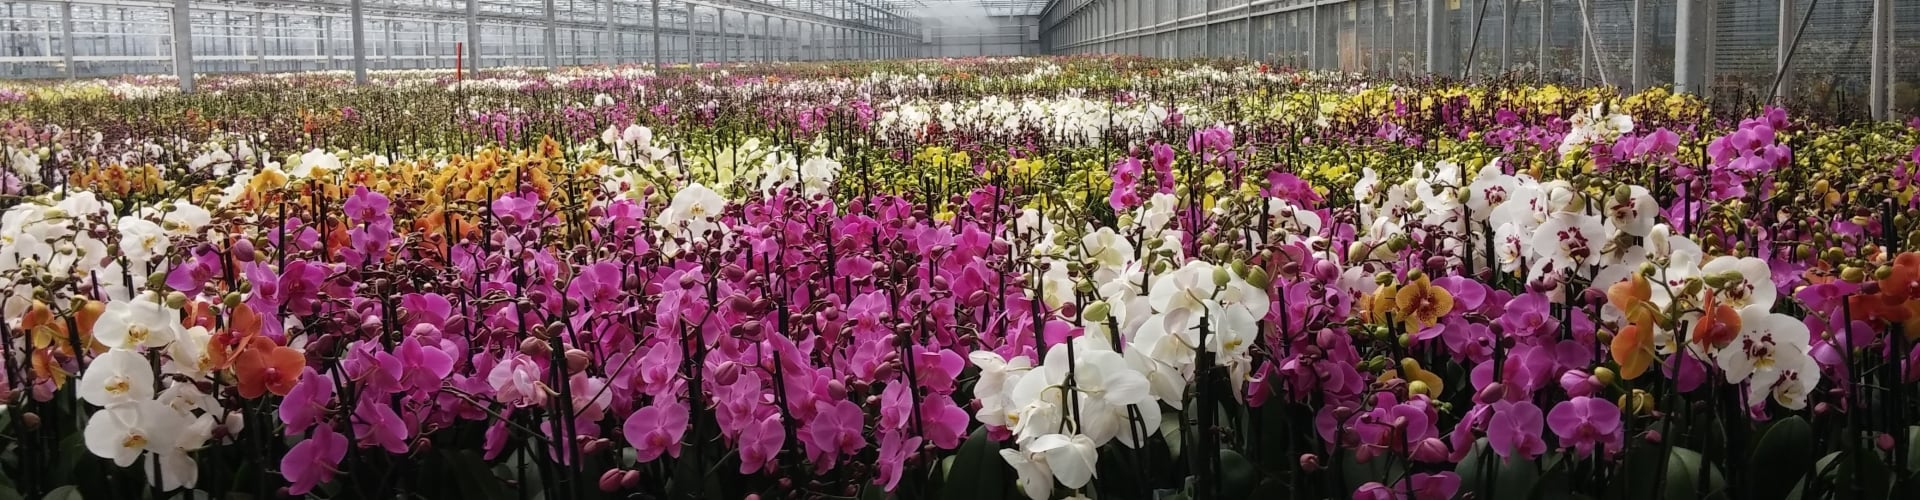 Phalaenopsis Orchid plants growing in greenhouse in Holland